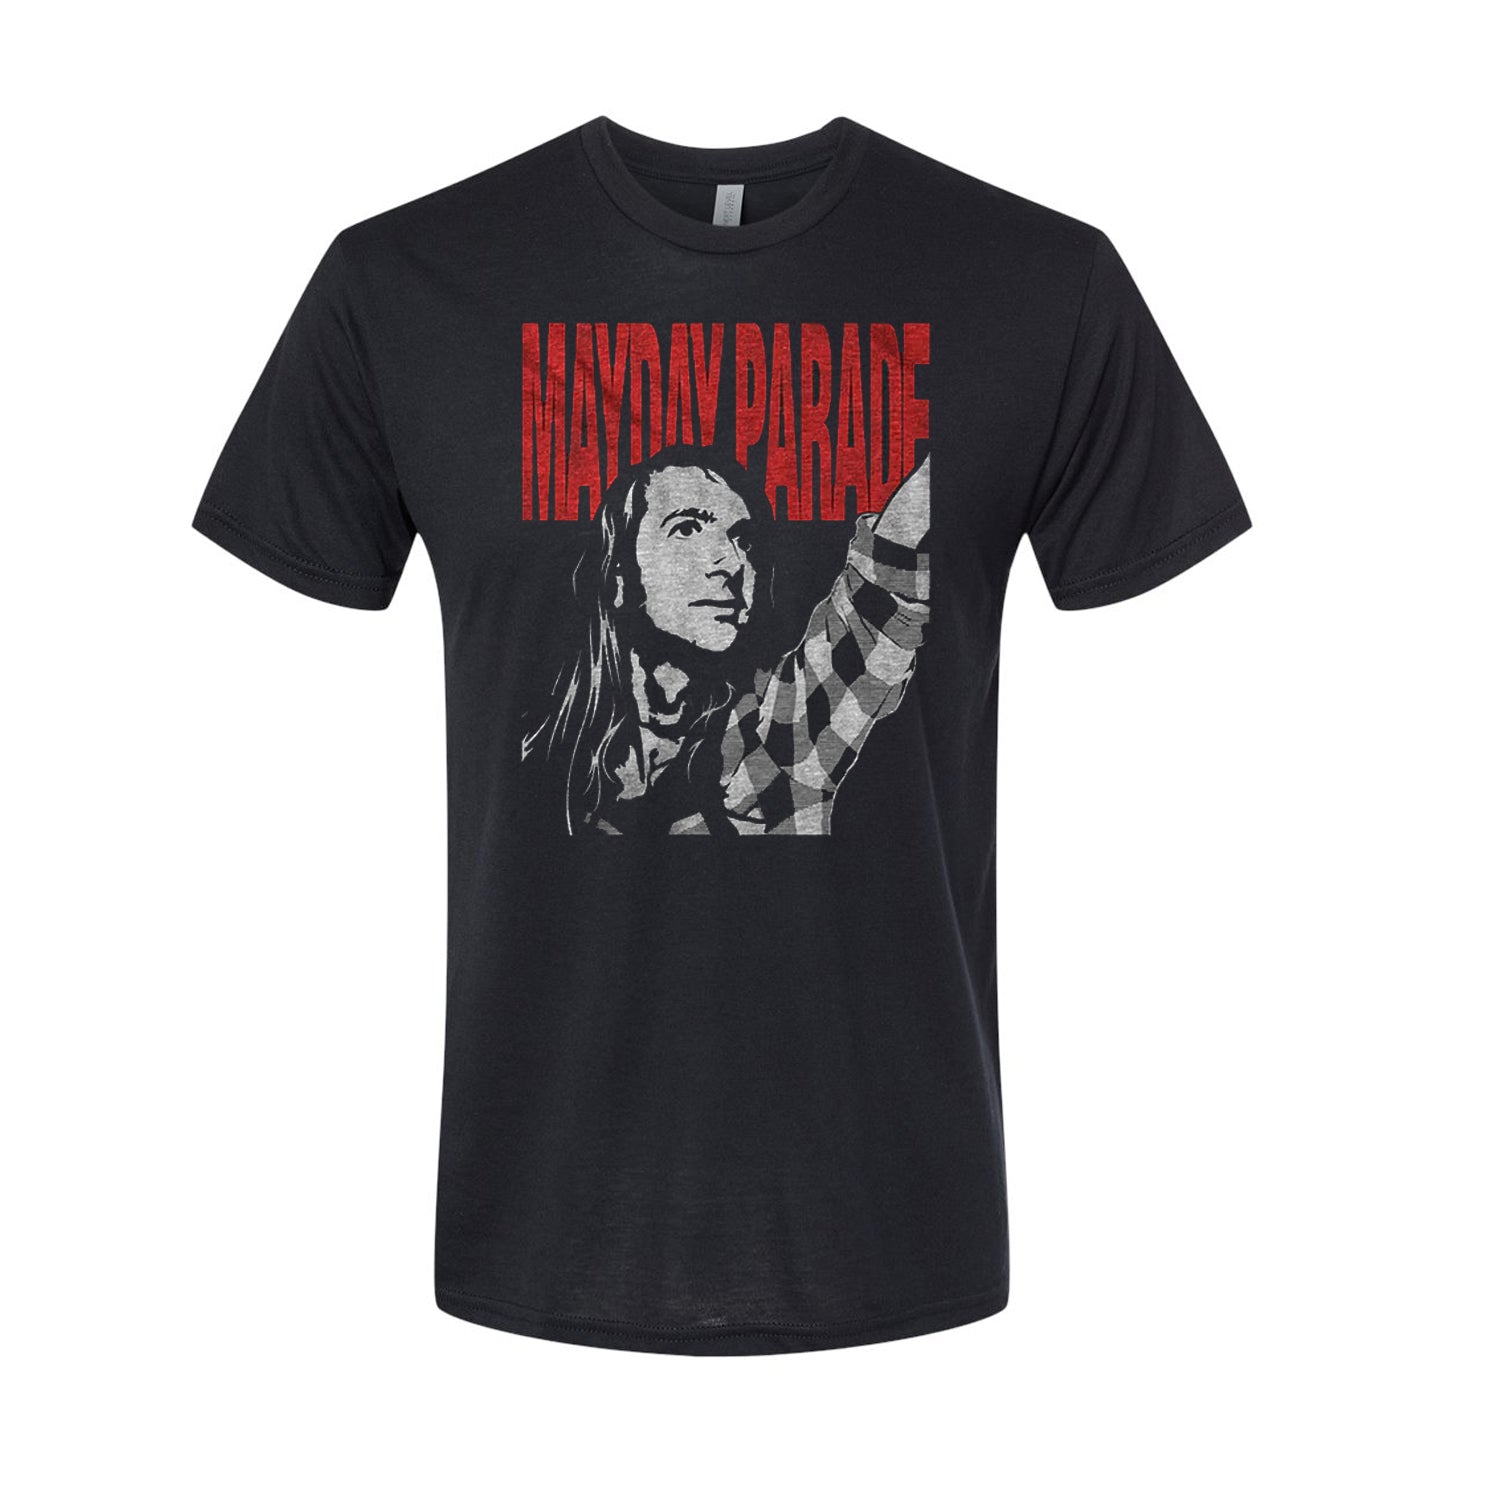 image of a heather black tee shirt on a white background. tee has a full chest print with red across the top that says mayday parade. below is a man with long hair, wearing a checkerboard plaid shirt and his arm up pointing. 